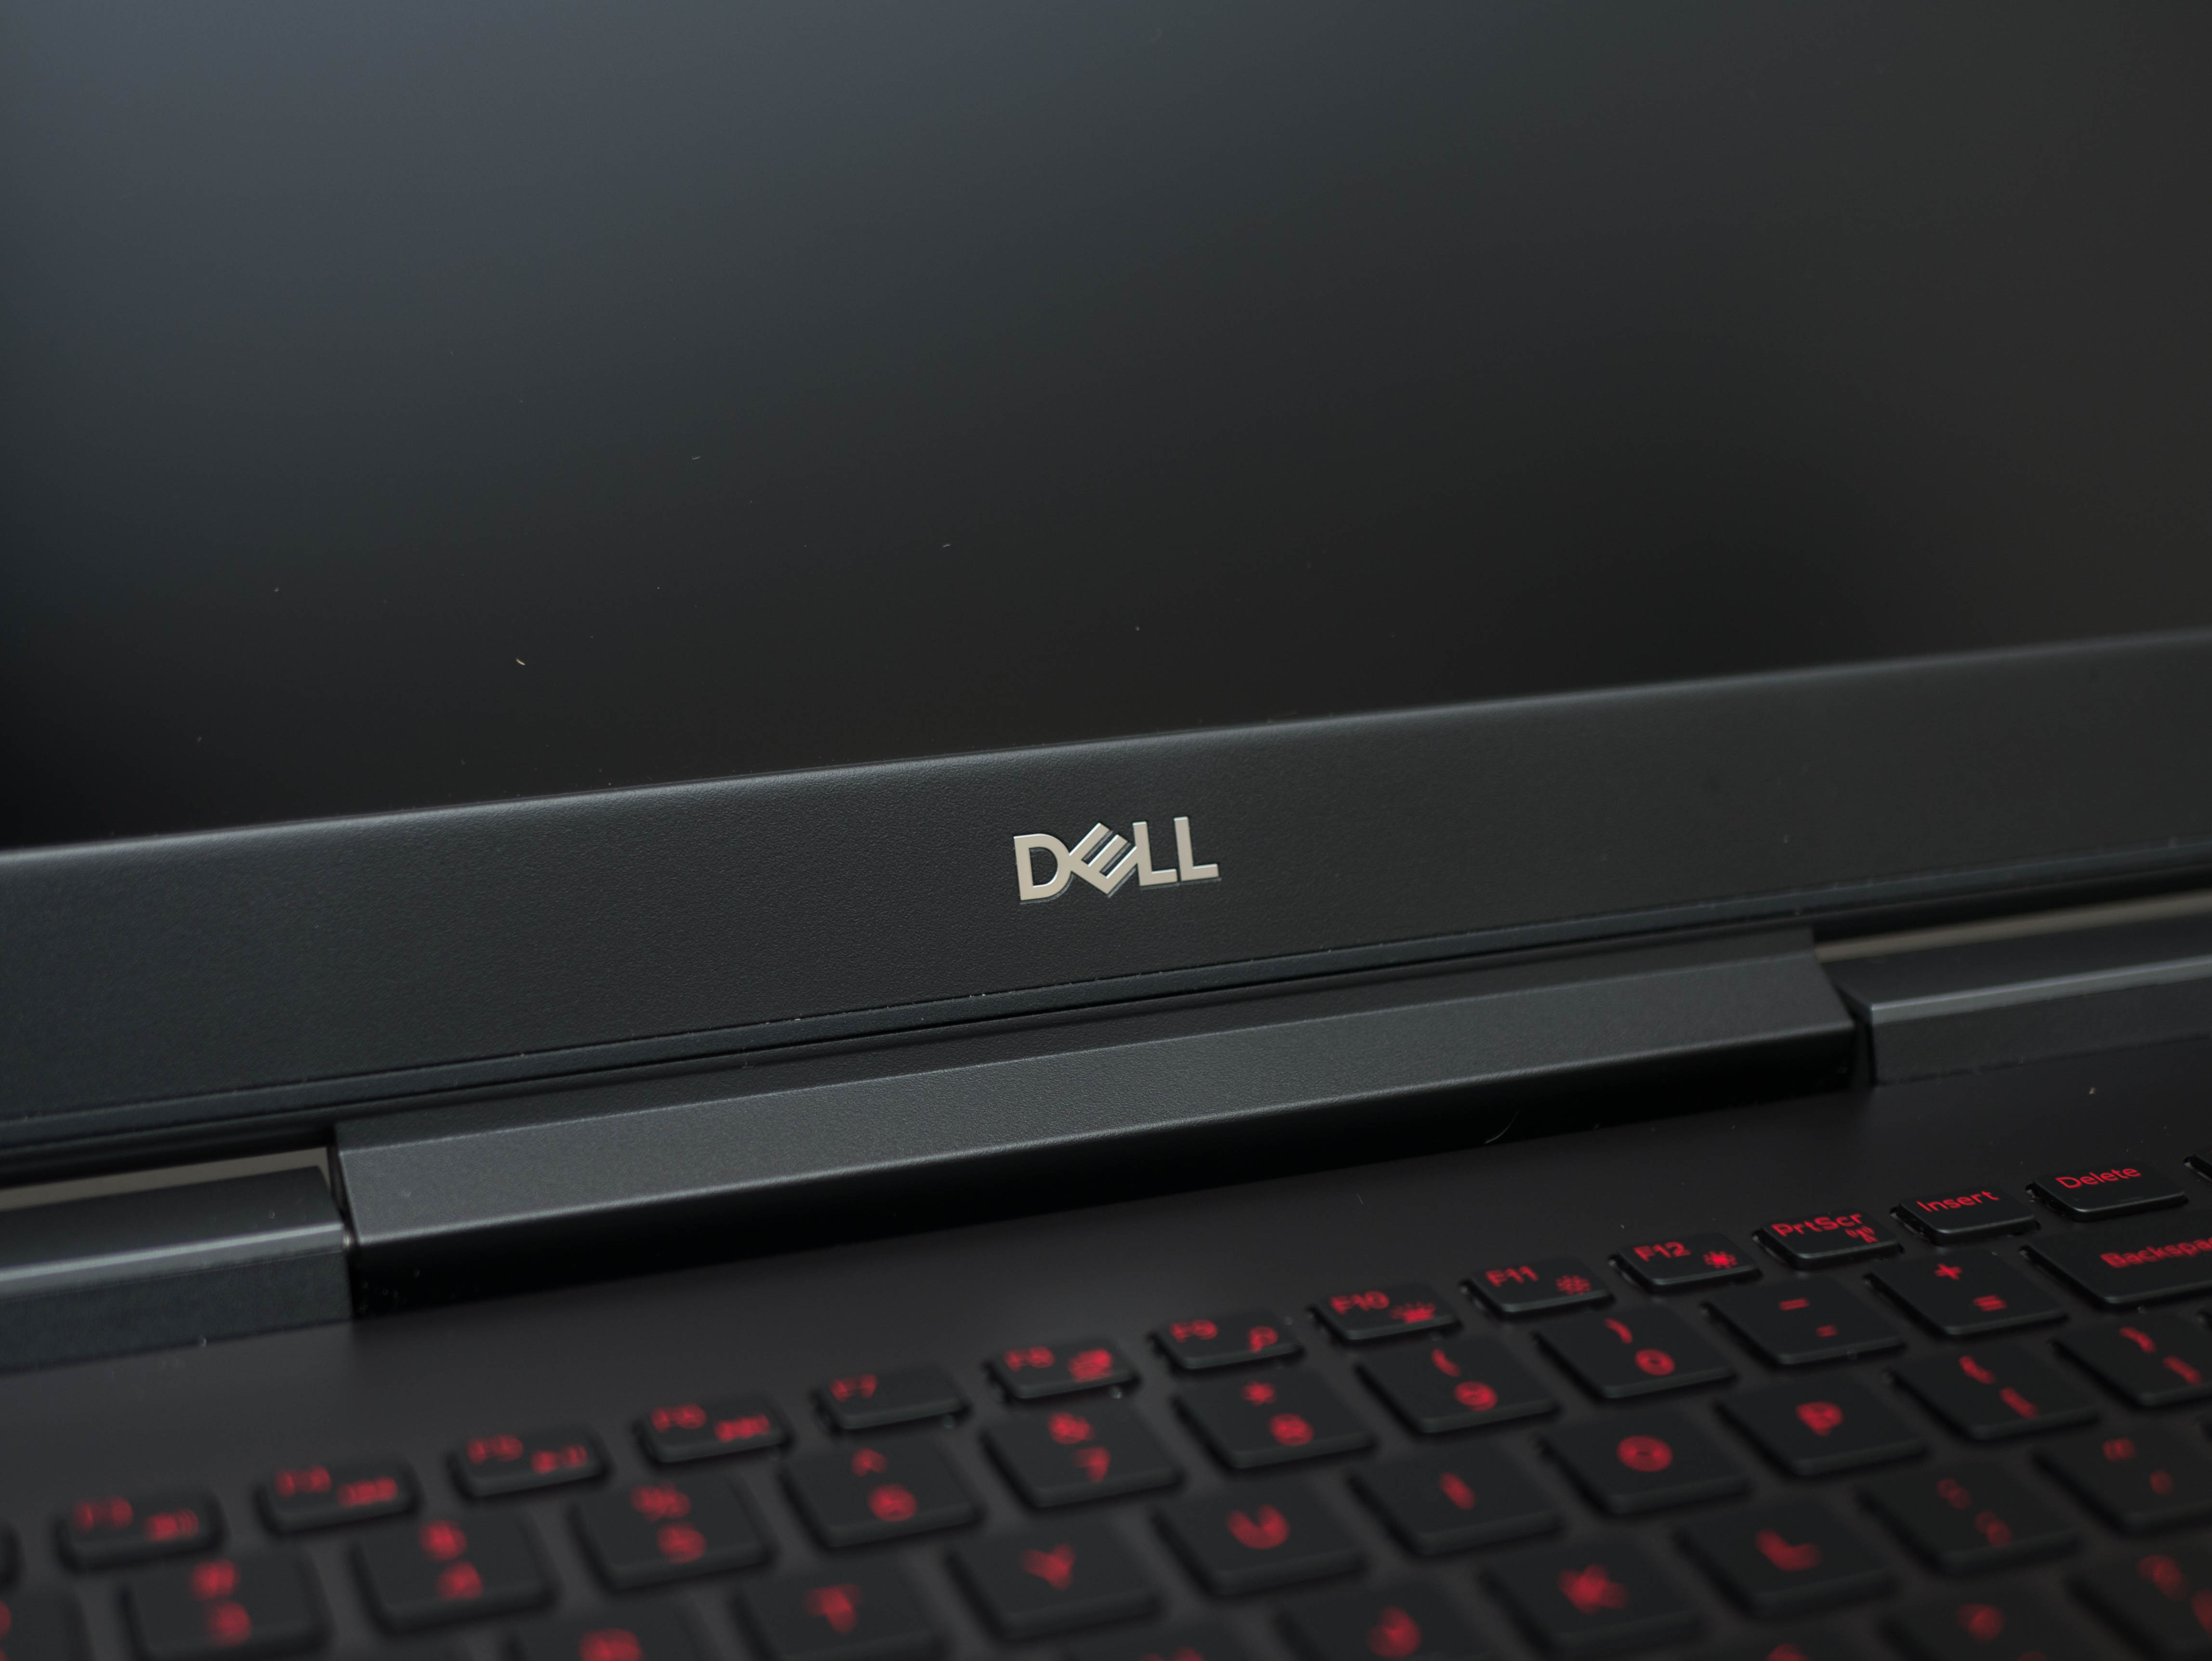 dell inspiron 15 7000 gaming laptop review - 首页